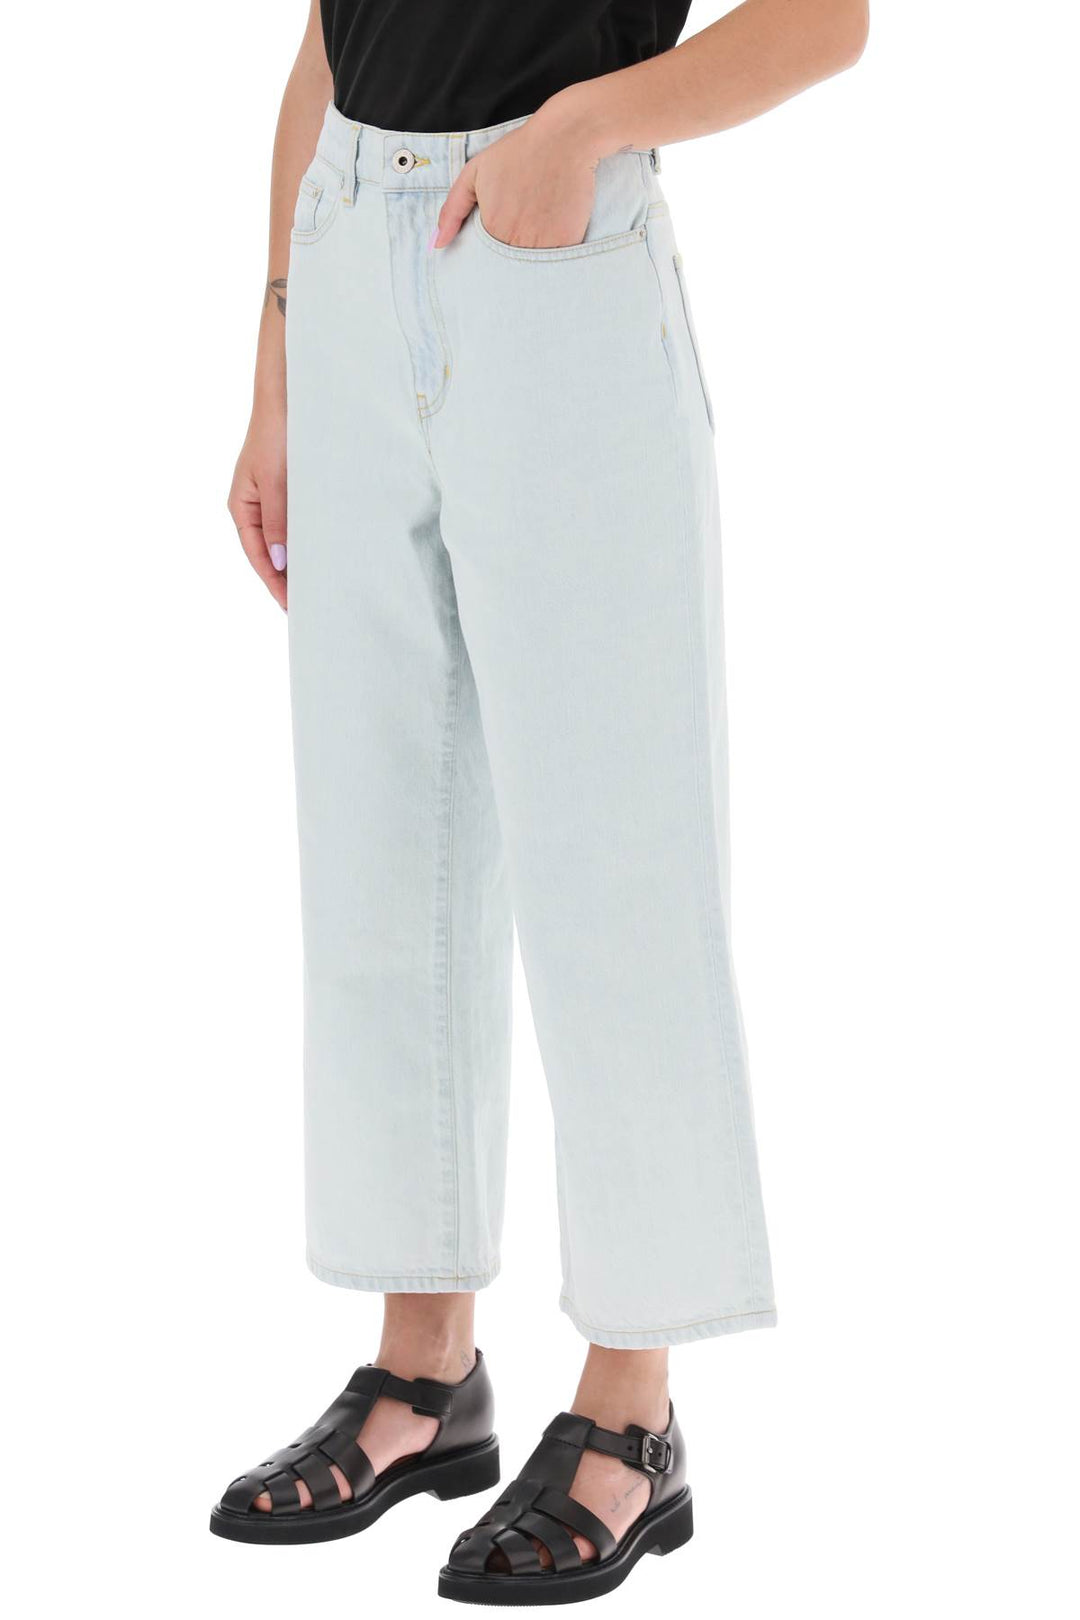 Kenzo 'Sumire' Cropped Jeans With Wide Leg   Celeste